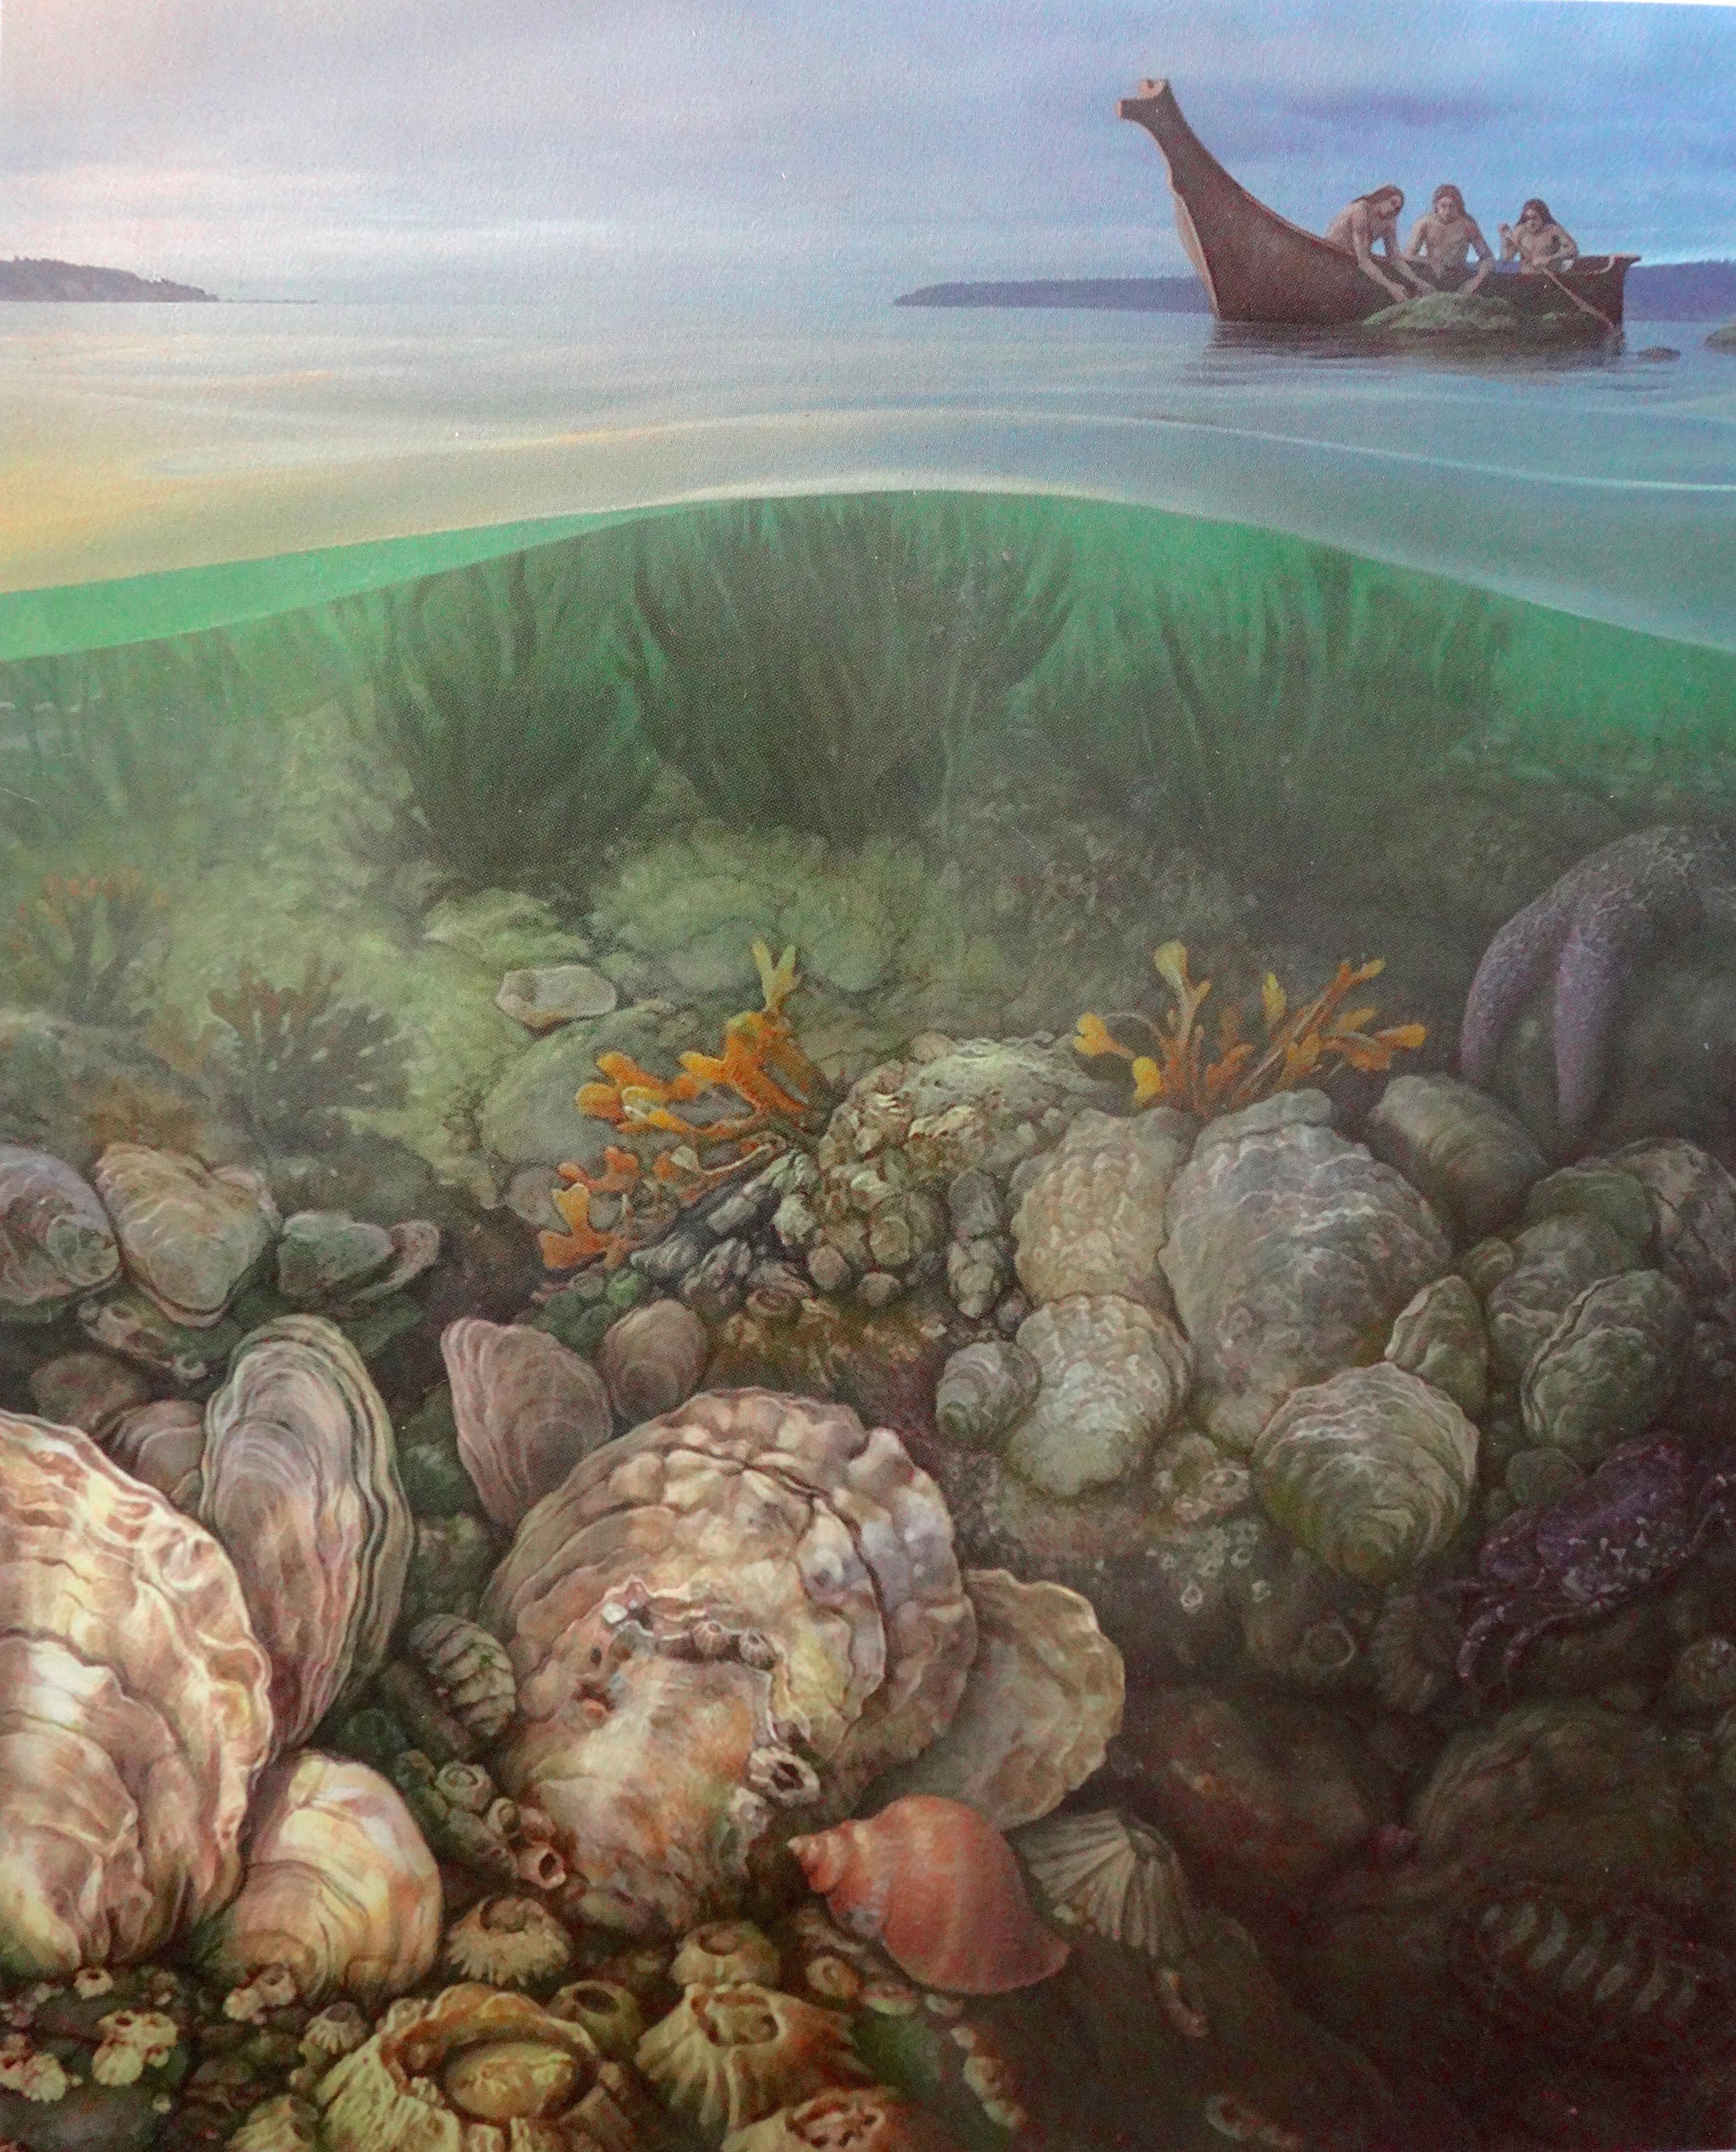 Artist's rendition of healthy oyster beds showing relationship to people and other species.